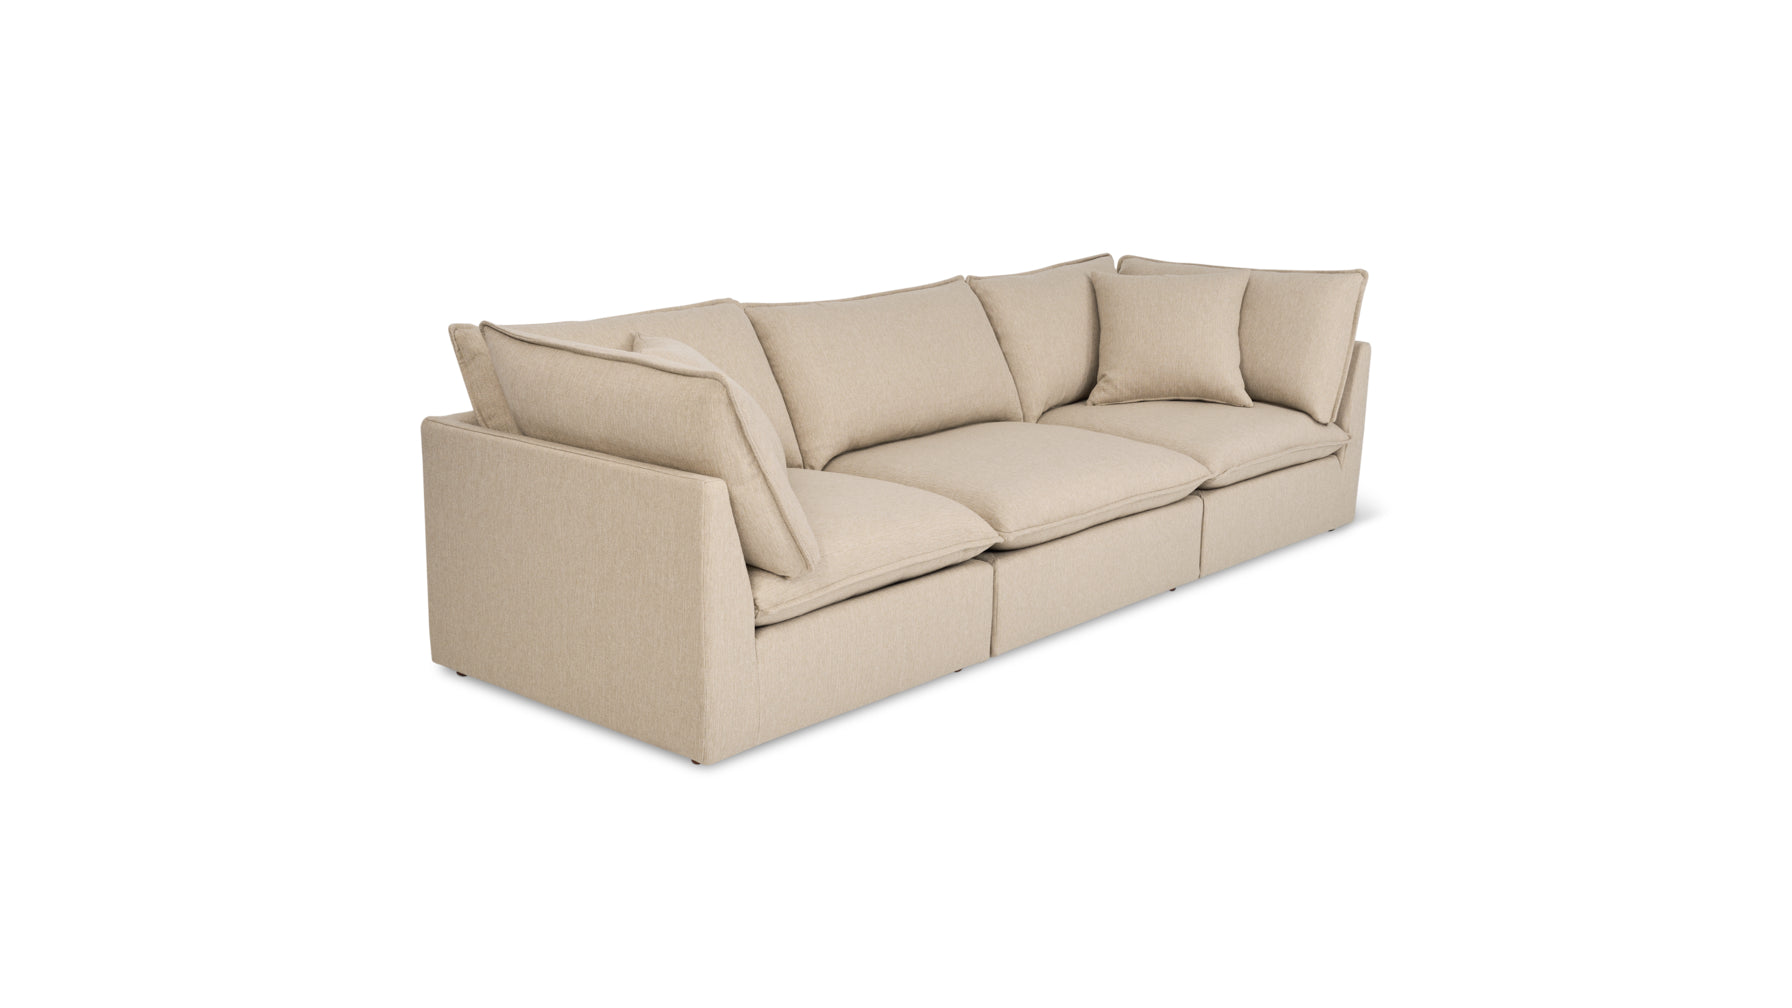 Chill Time 3-Piece Modular Sofa, Biscuit - Image 2